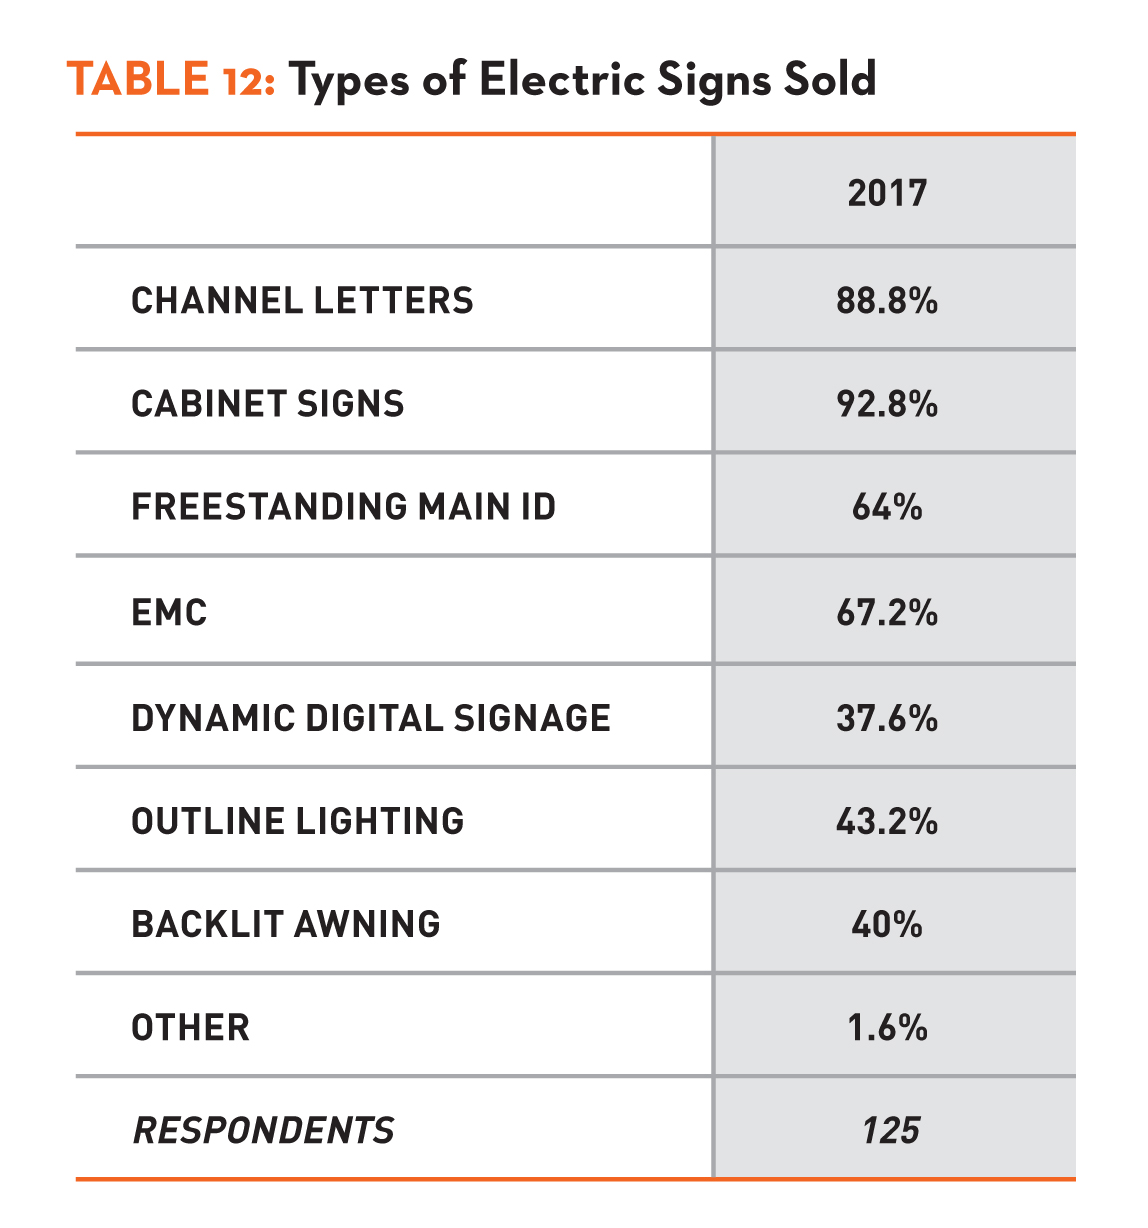 Table 12: Types of Electric Signs Sold